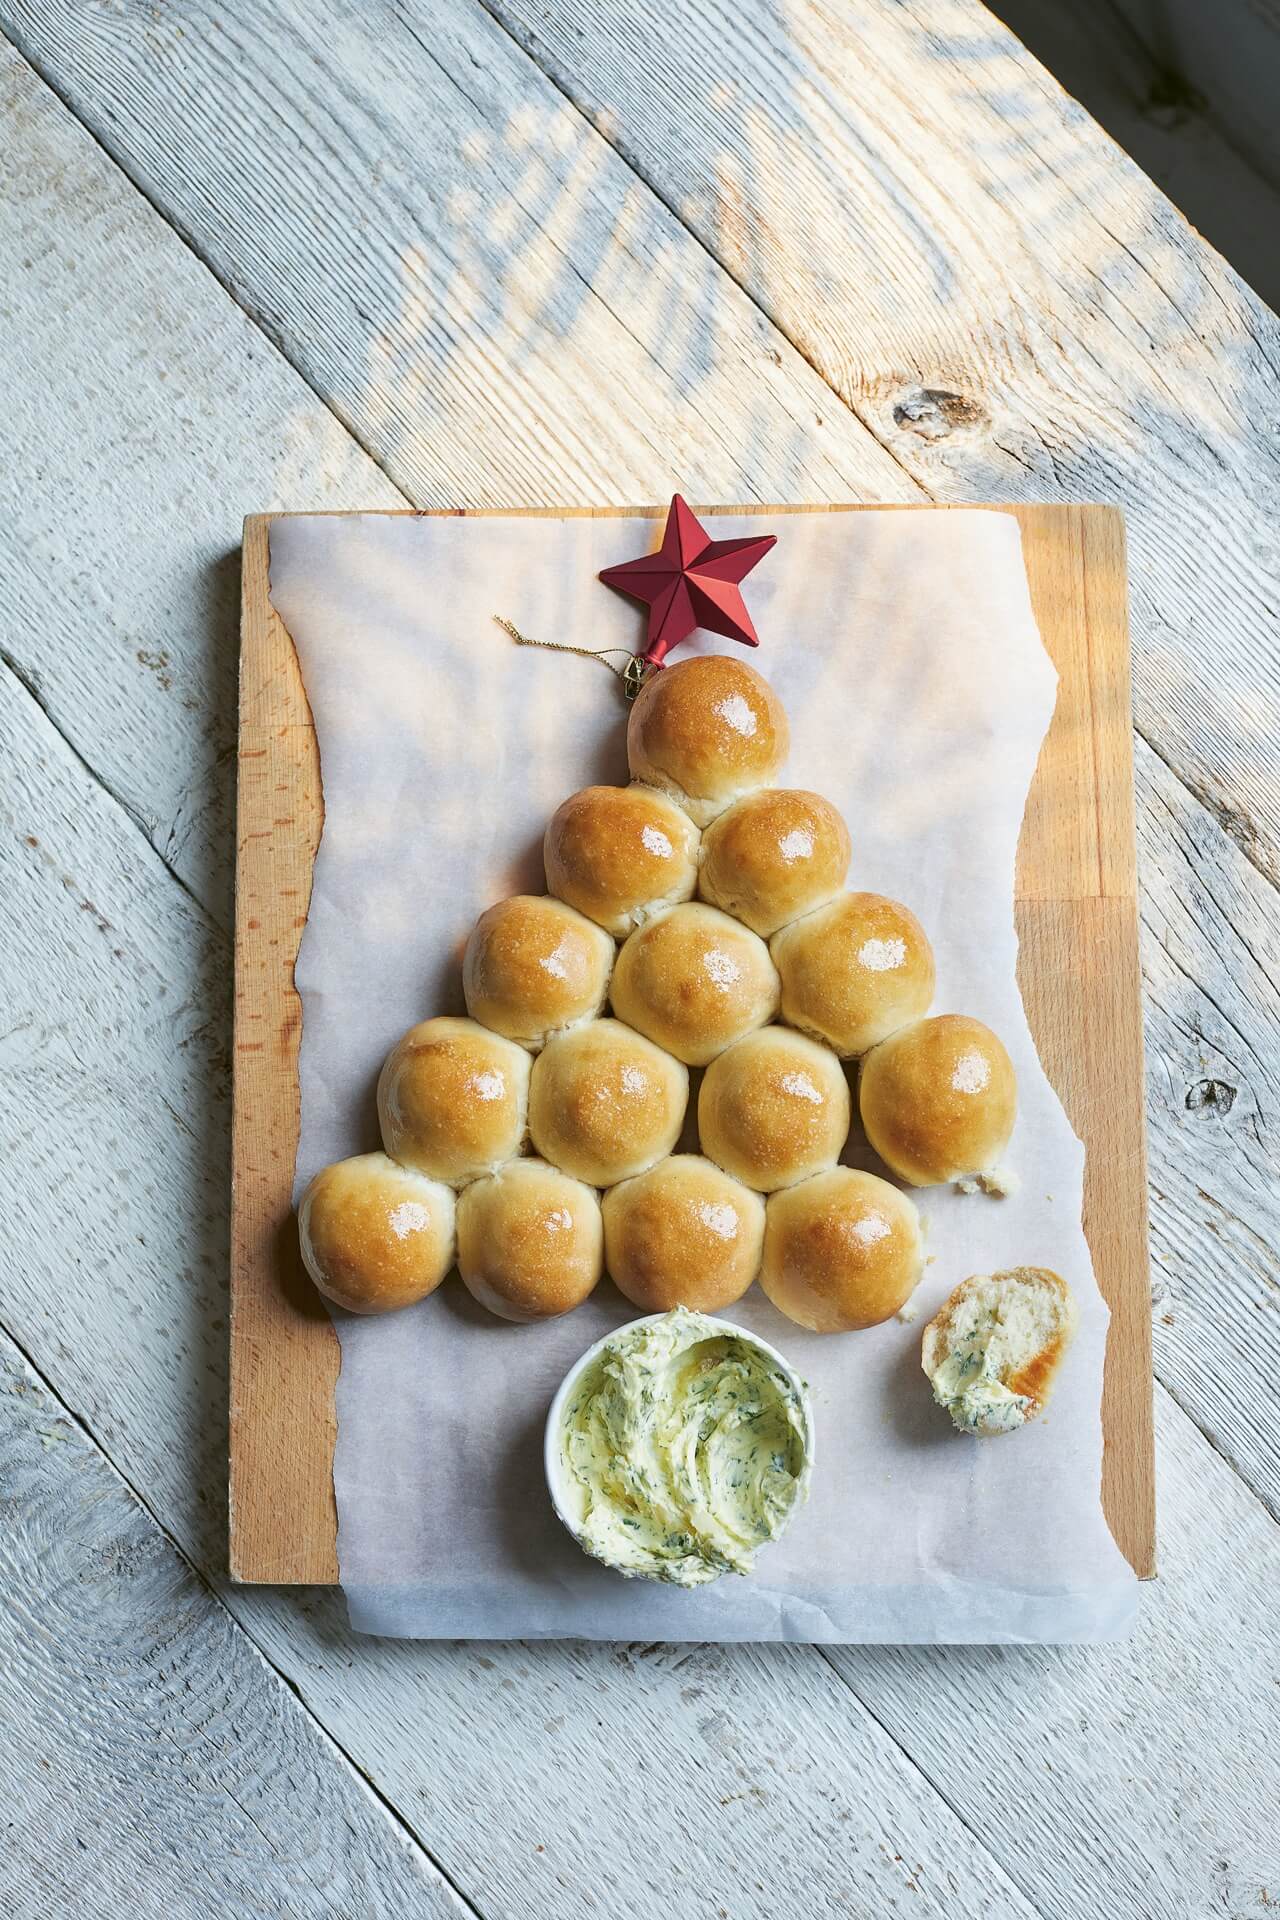 dough ball recipe from Easy Vegan Christmas by Katy Beskow